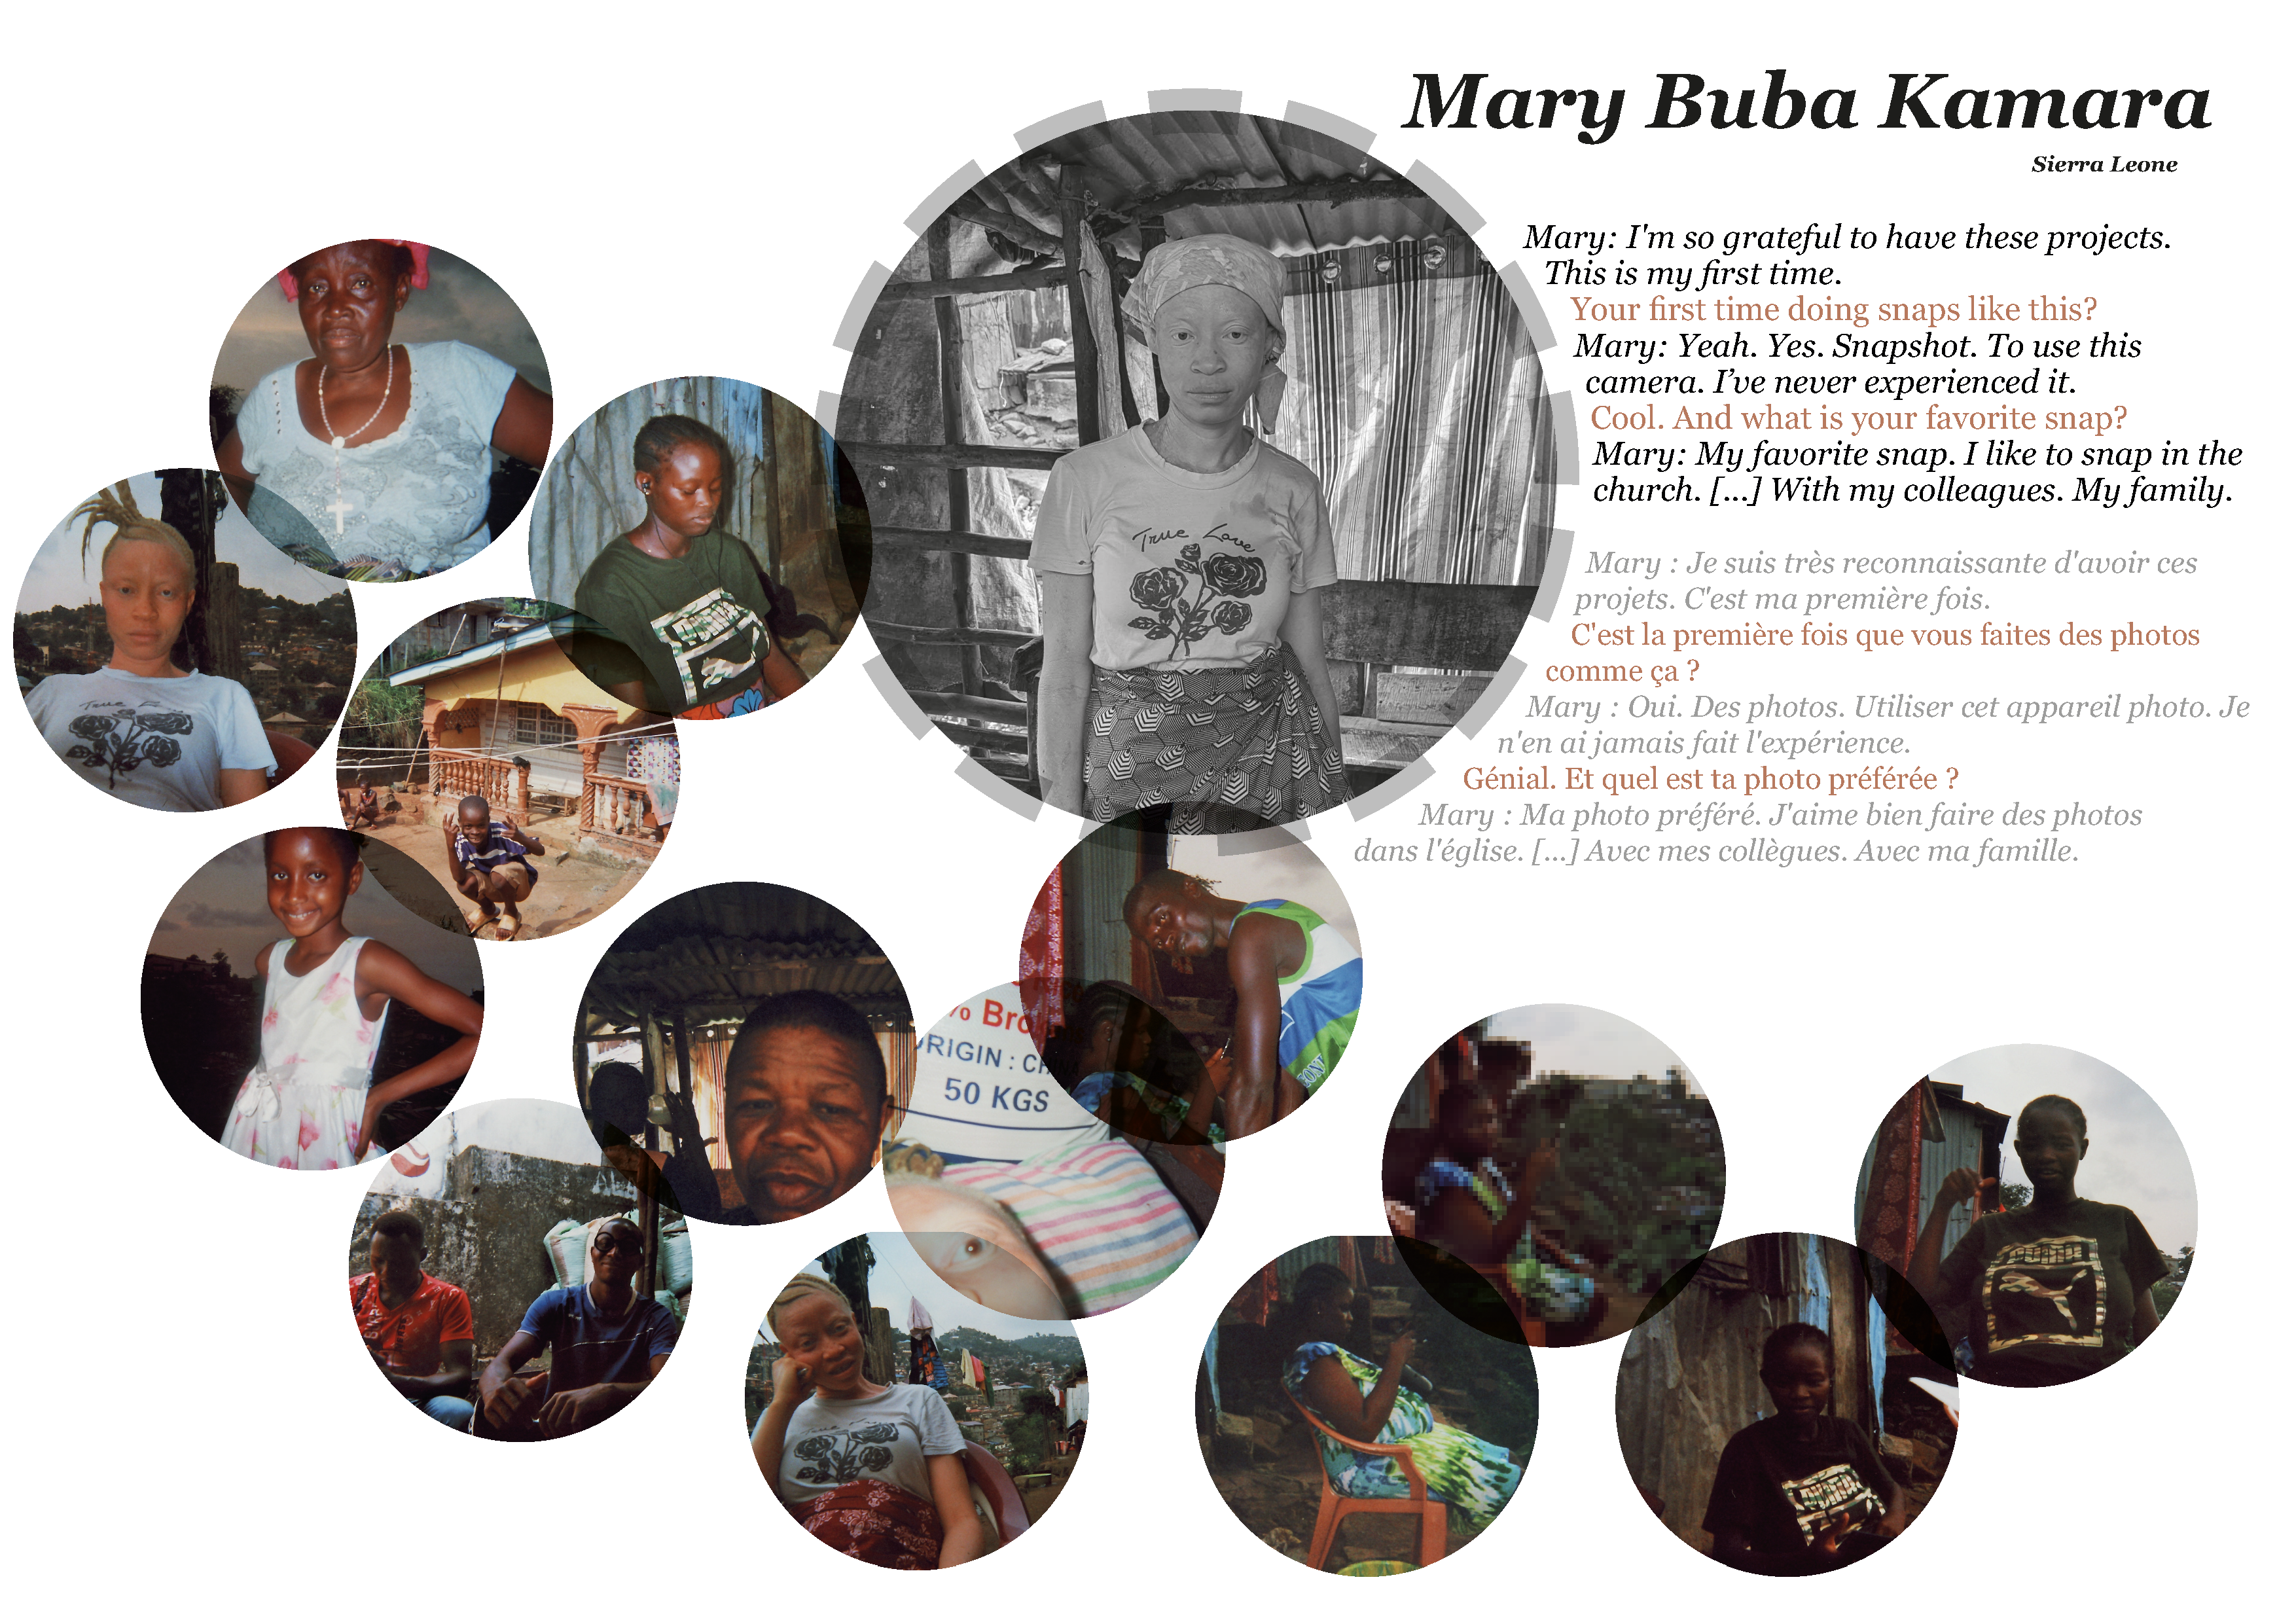 Collage of pictures of religion and peace by Mary Buba Kamara in Sierra Leone